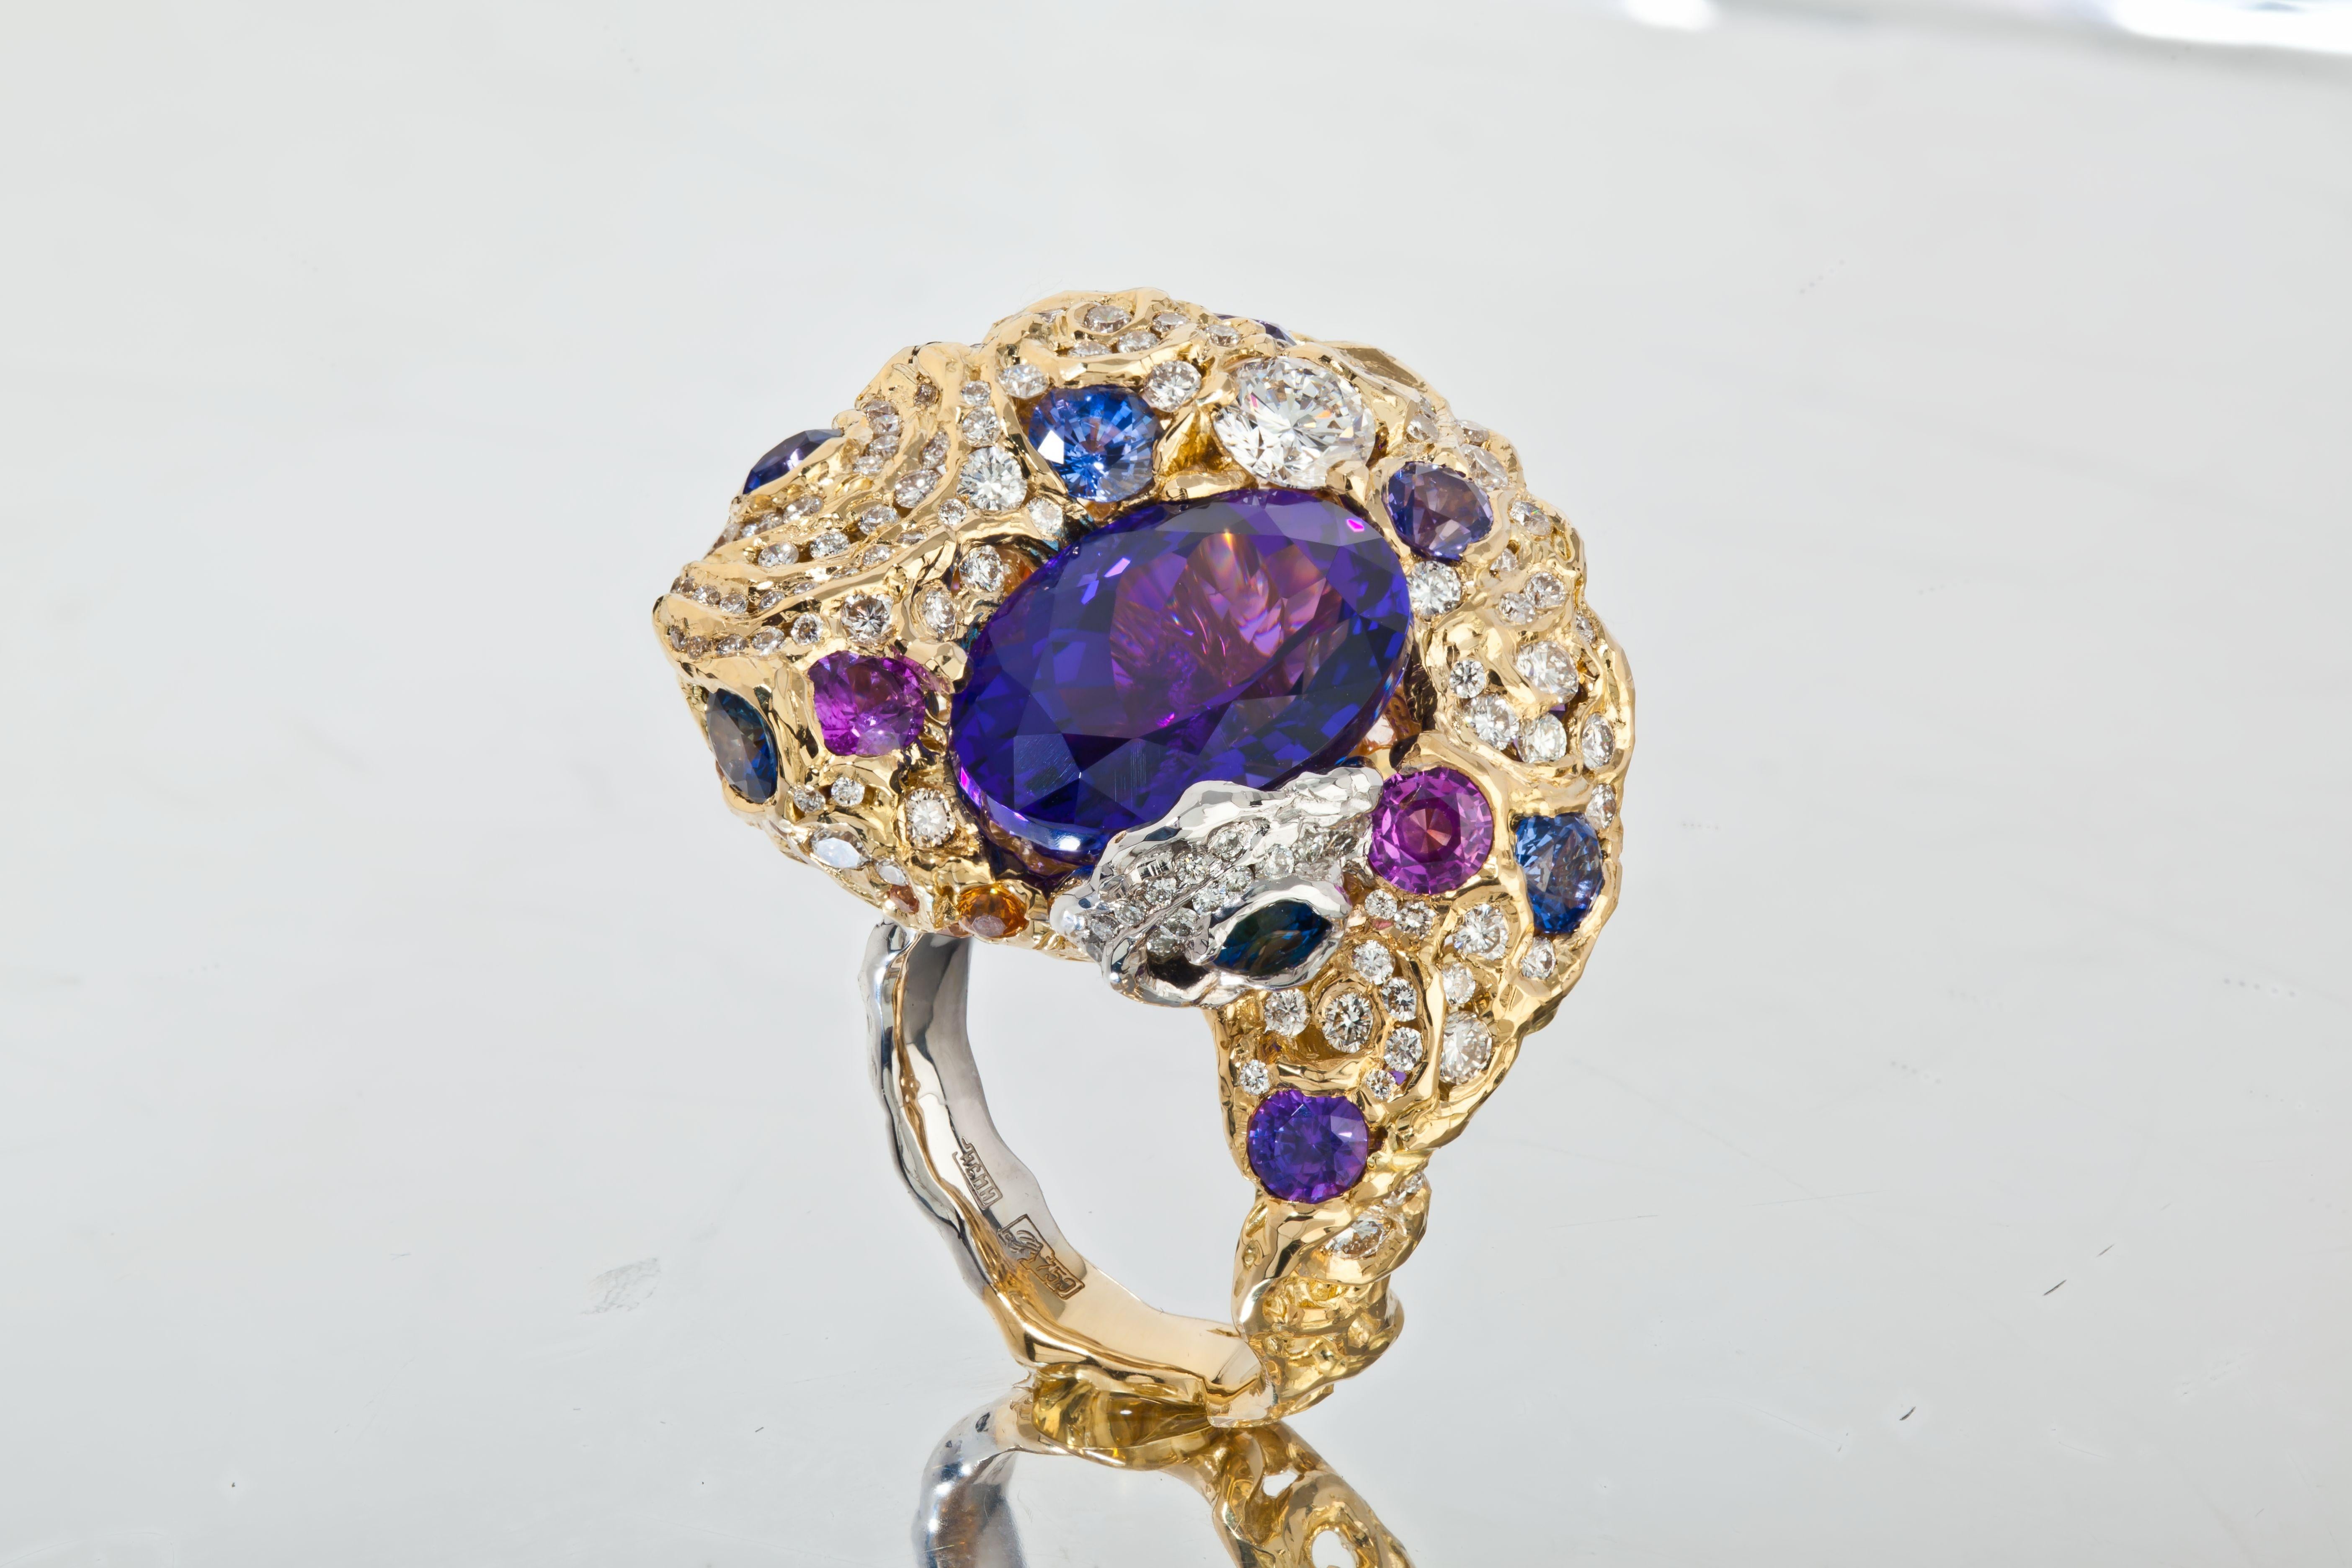 A deep colour 10 carat Tanzanite is artistically designed with 18 karat yellow gold,  1.71 carat diamonds and 5.97 carat fancy sapphire, making a swirling night sky. Wearing this handmade tri-dimensional ring, you will find different views and